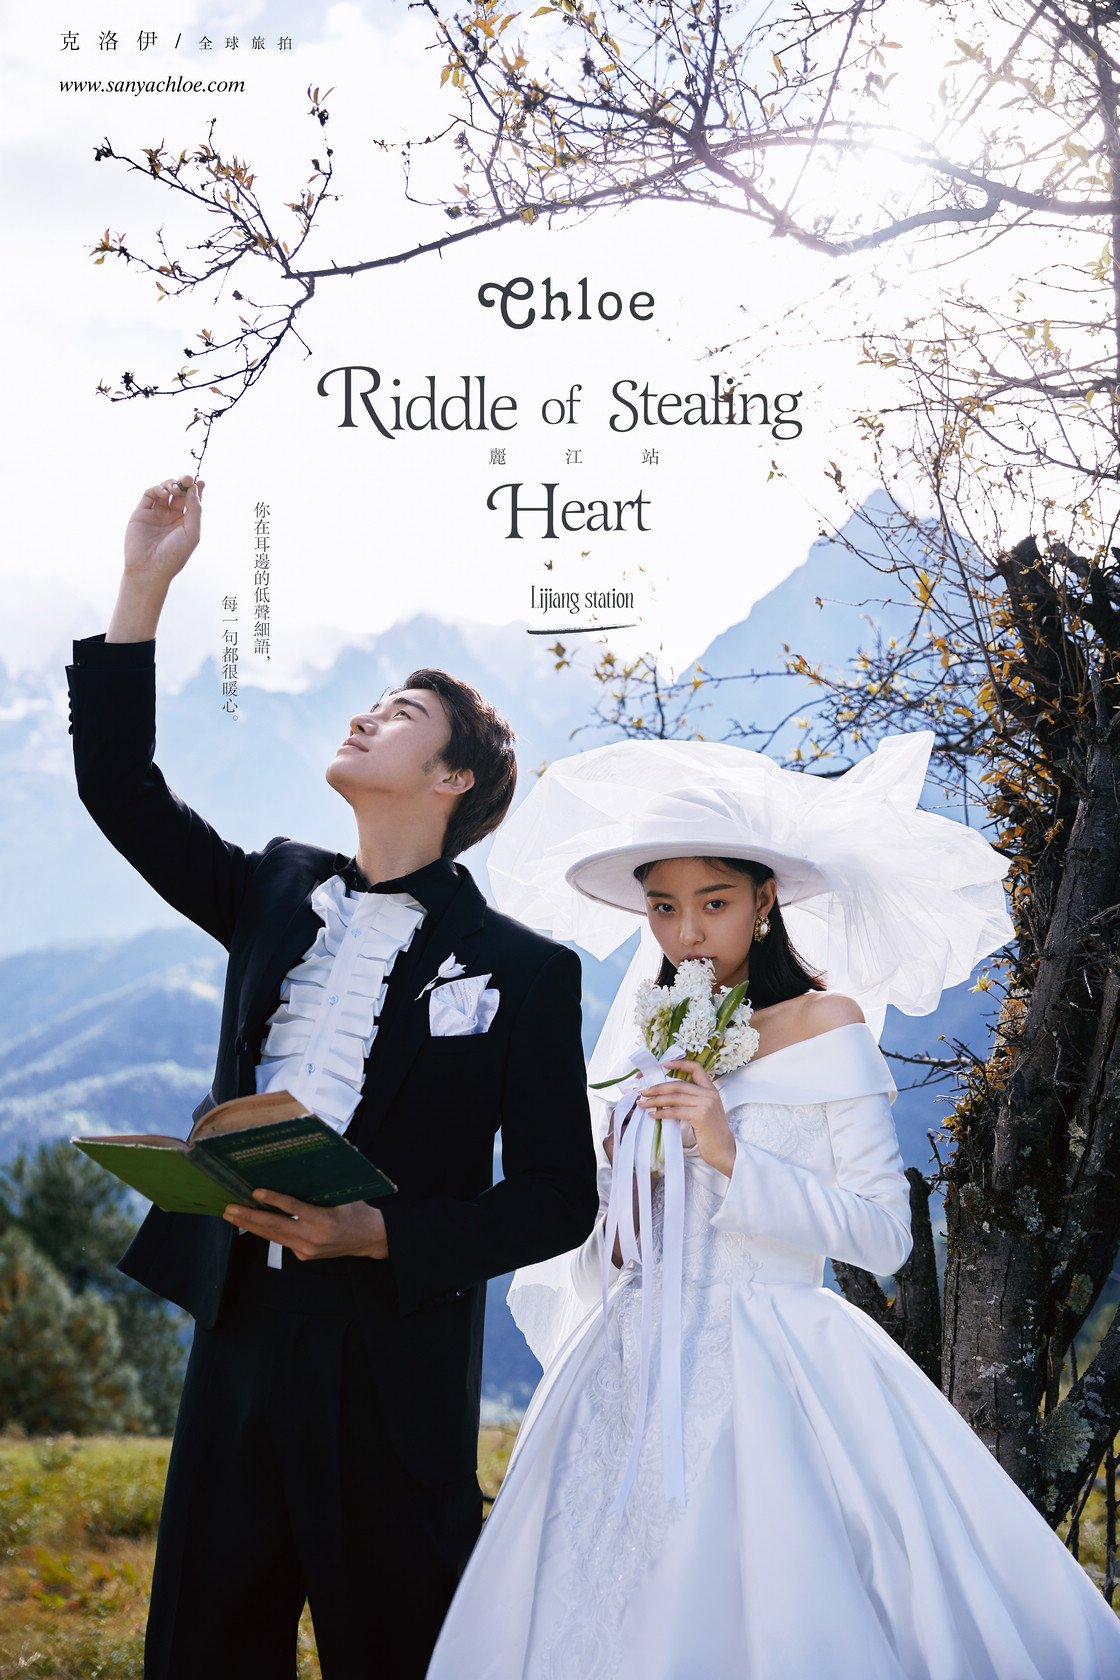 Riddle of Stealing Heart